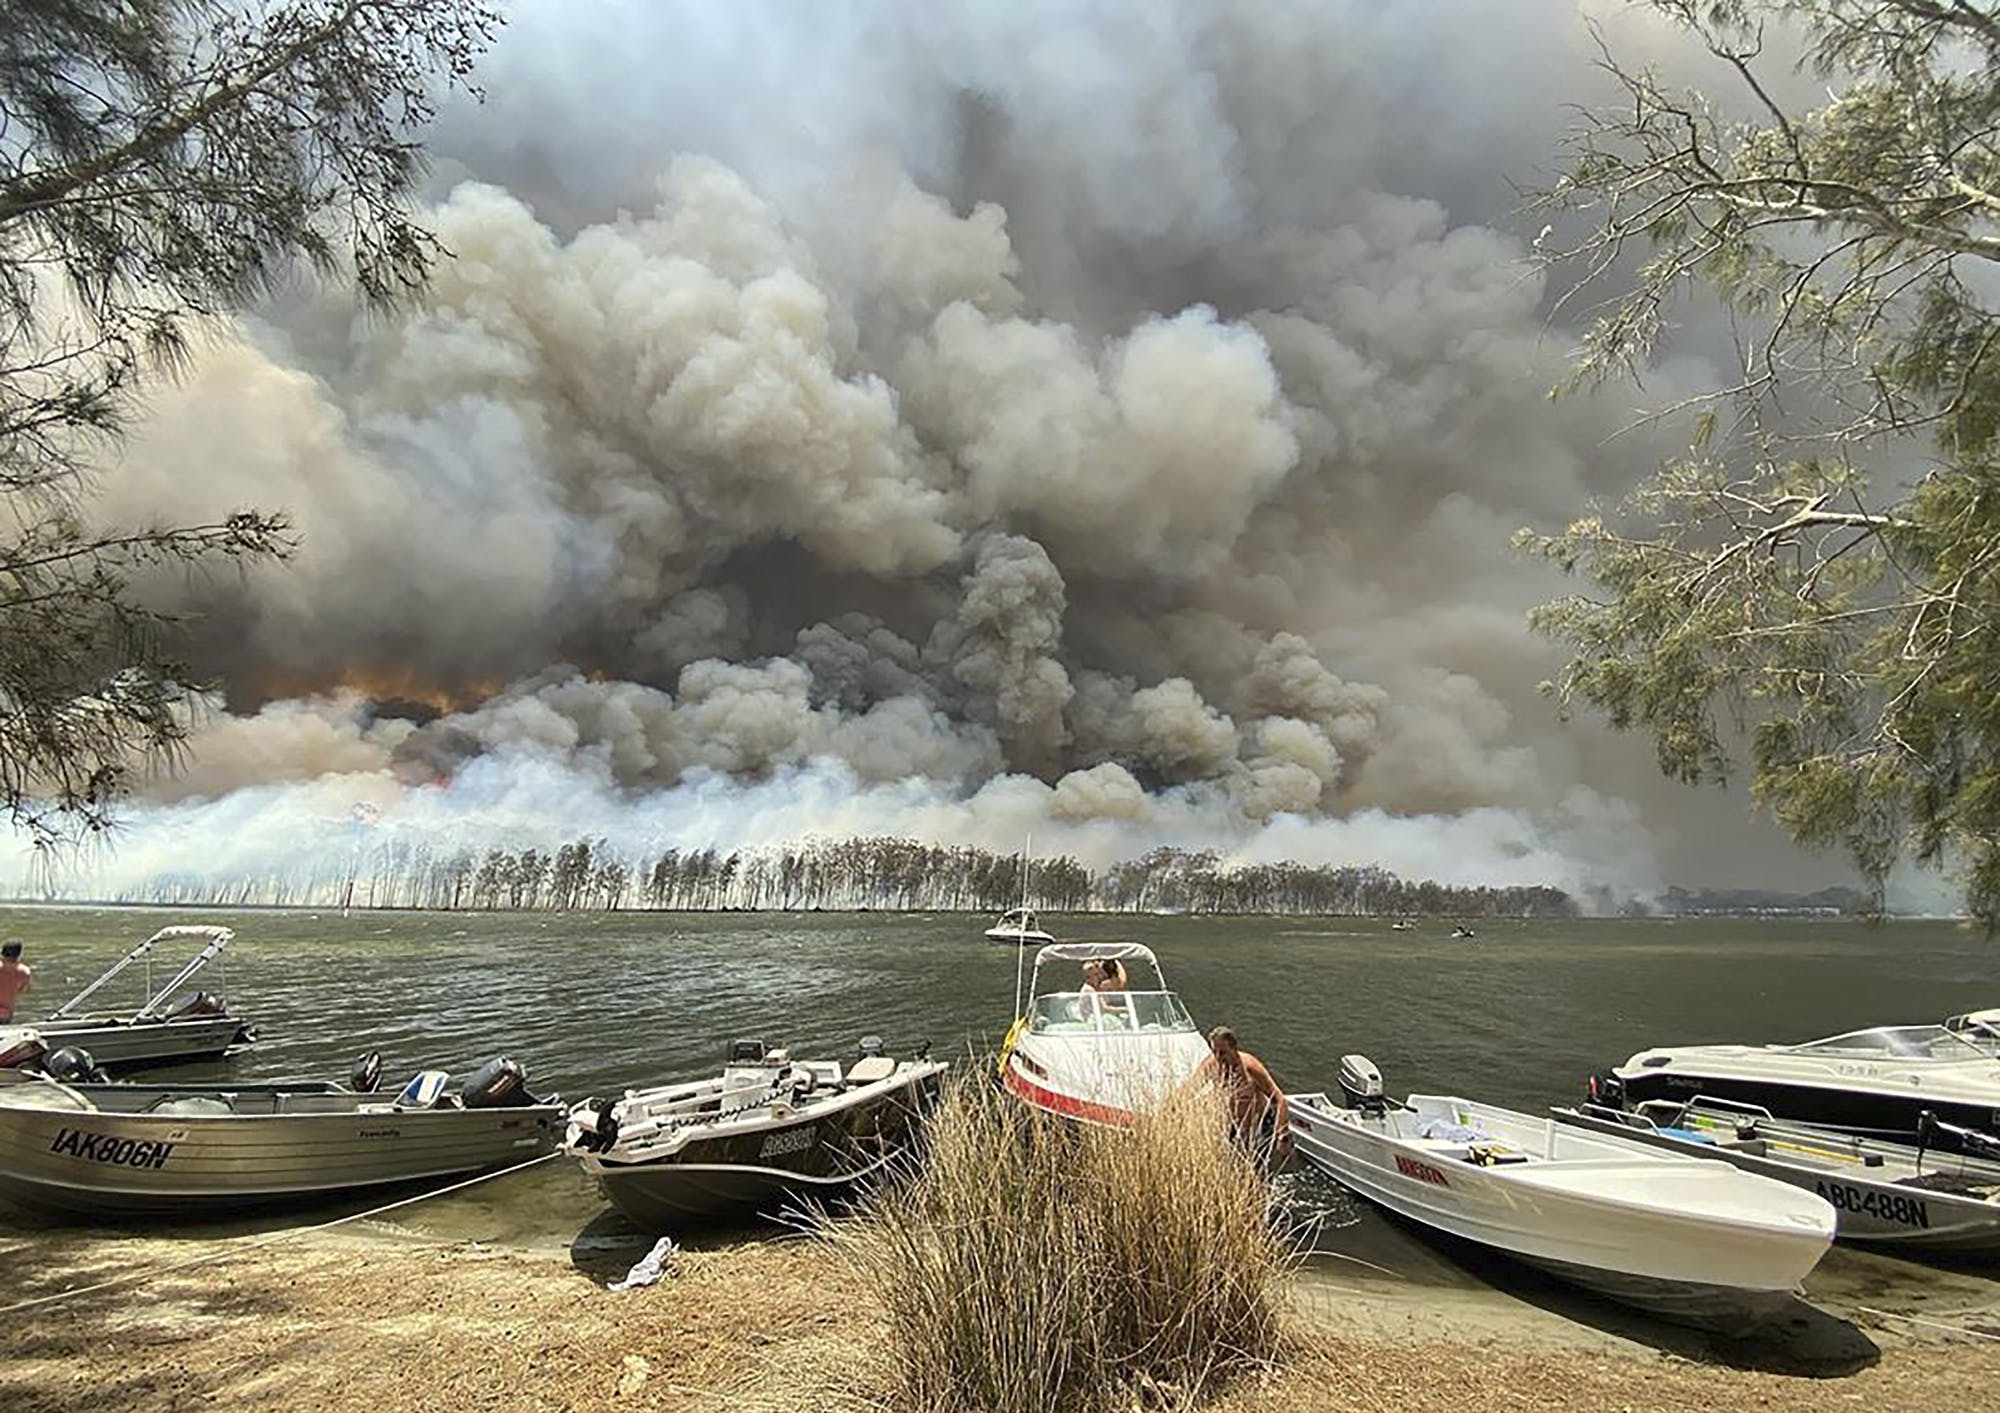 Smoke and wildfire rage behind Lake Conjola in Australia as residents and tourists fled the flames raging across the country’s eastern coast last week